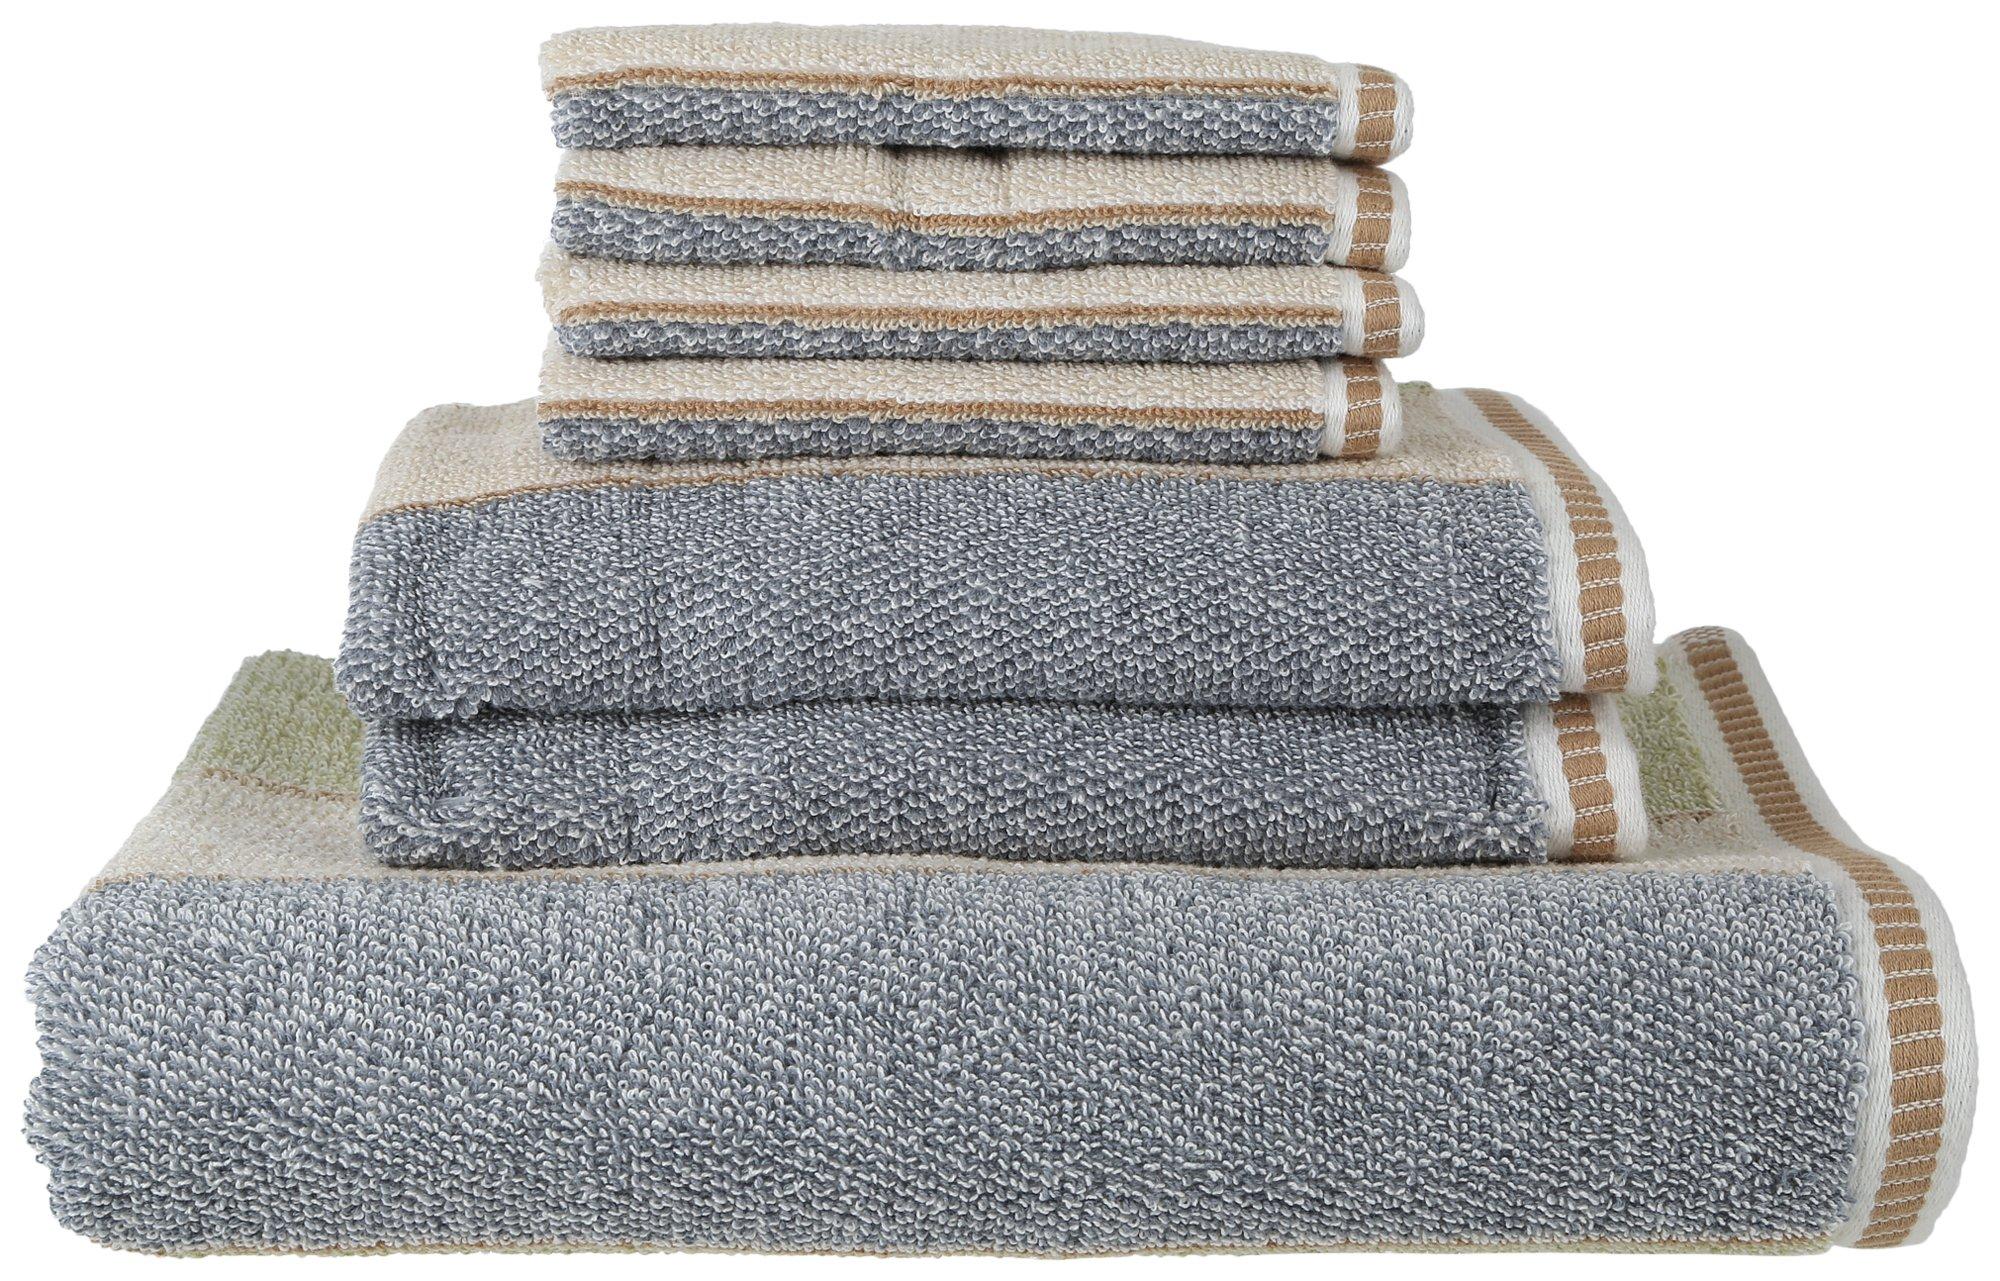 Dobby Printed Towel Collection